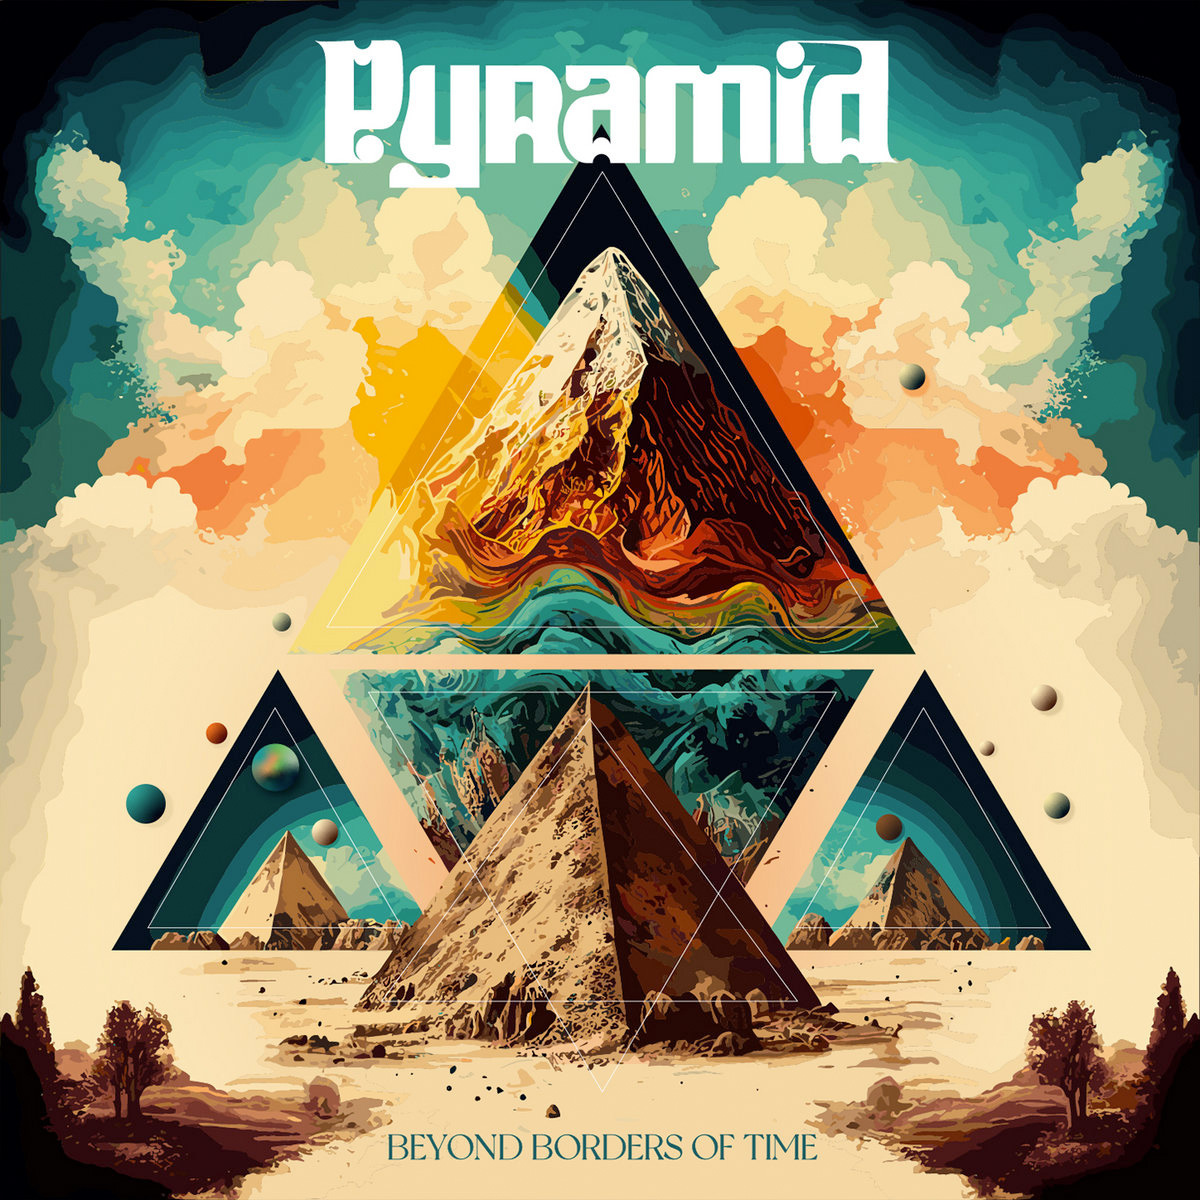 Beyond Borders of Time by Pyramid